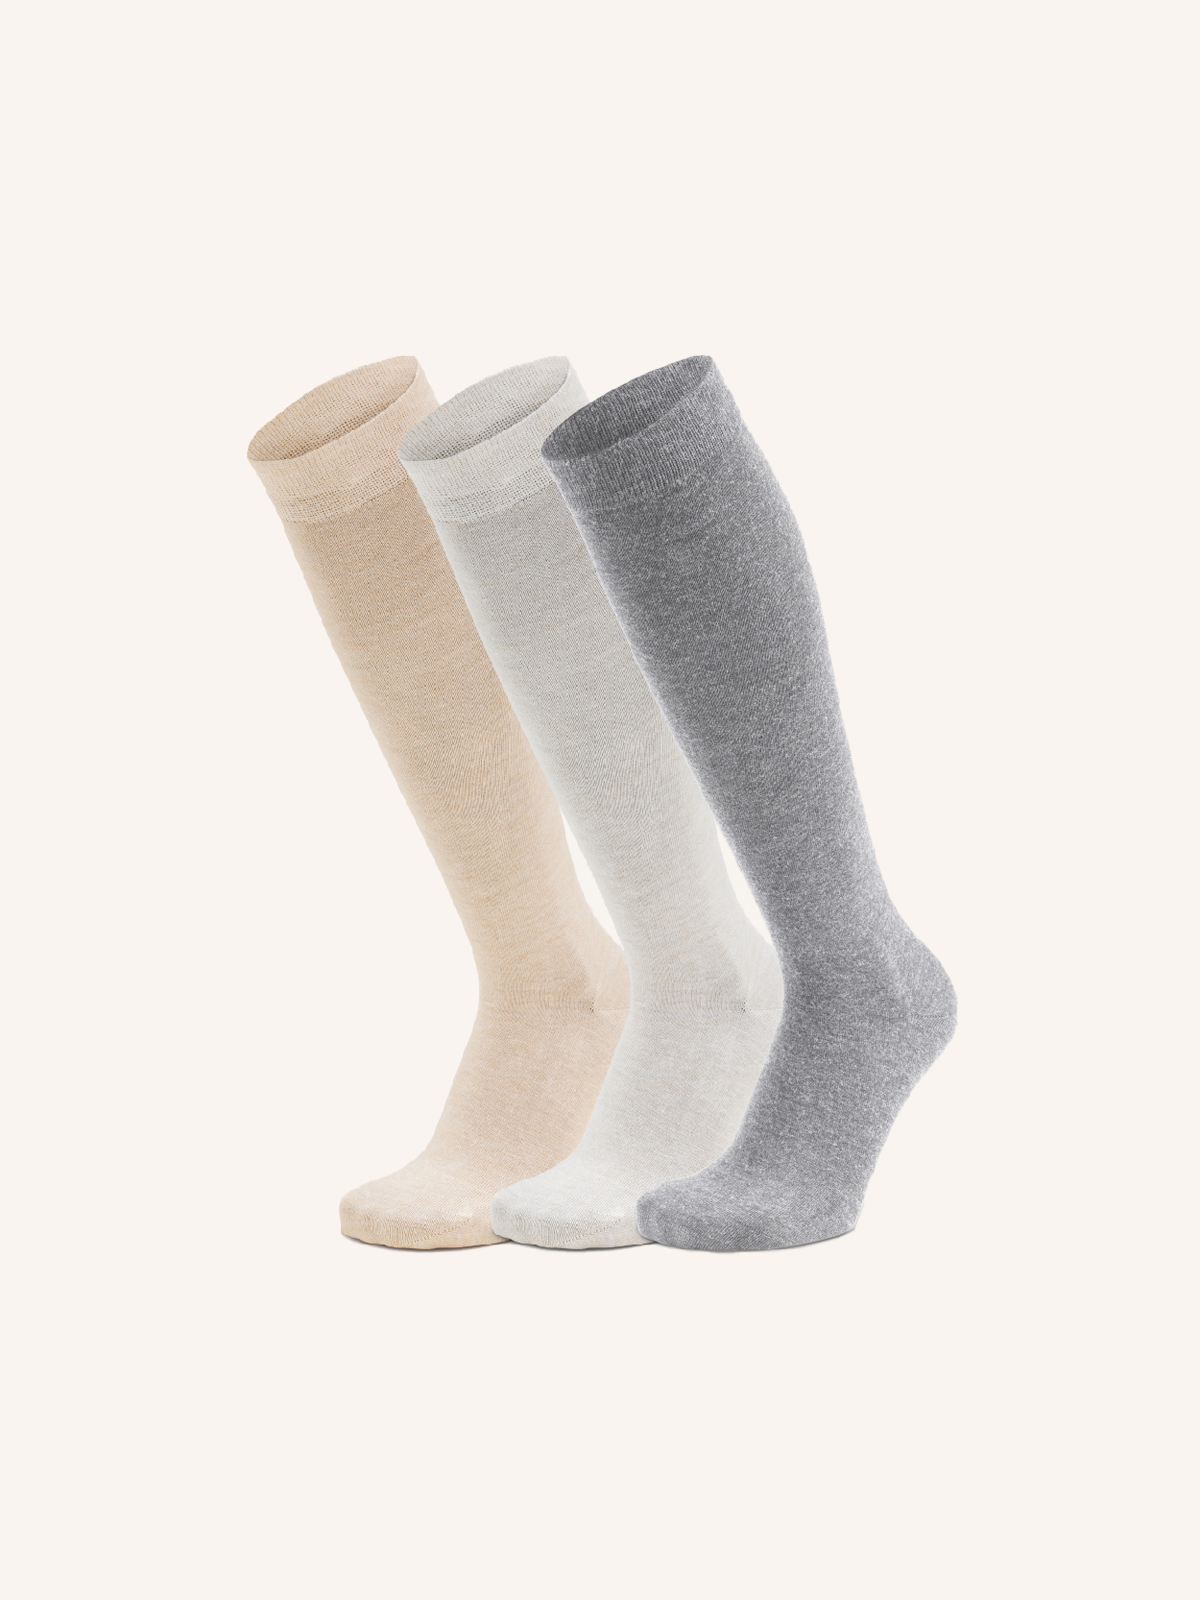 Long Socks in Cashmere and Viscose for Women | Plain Color | Pack of 3 Pairs | Ultra DL